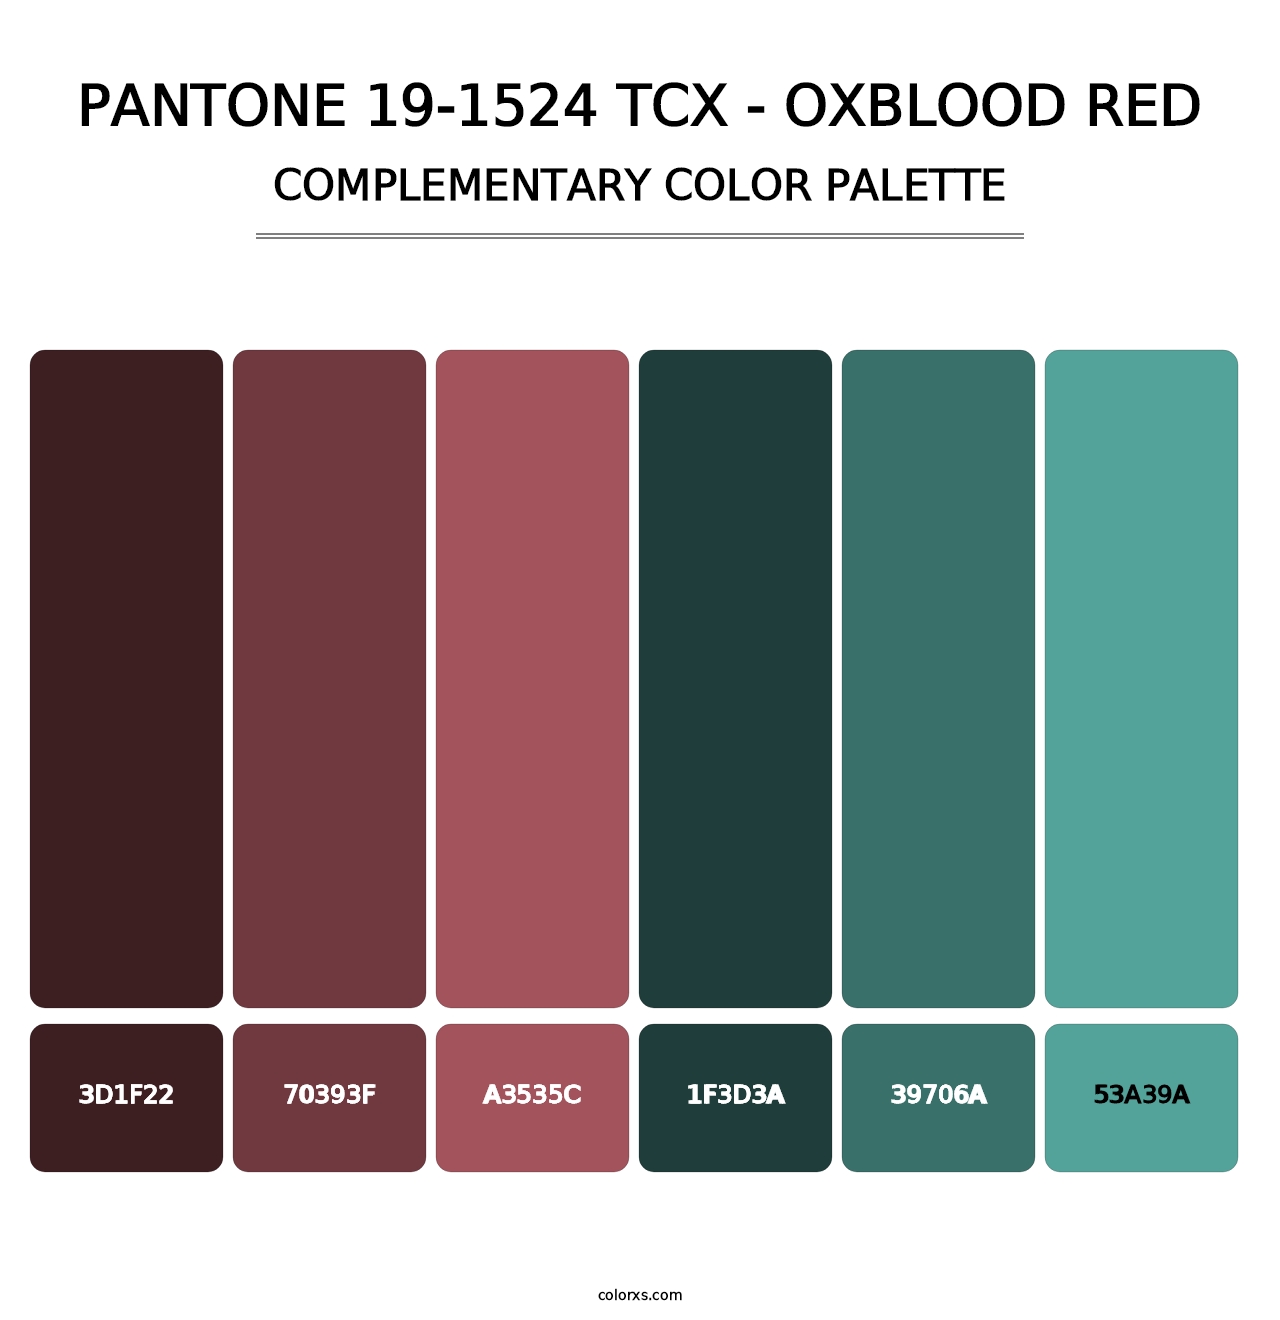 PANTONE 19-1524 TCX - Oxblood Red - Complementary Color Palette